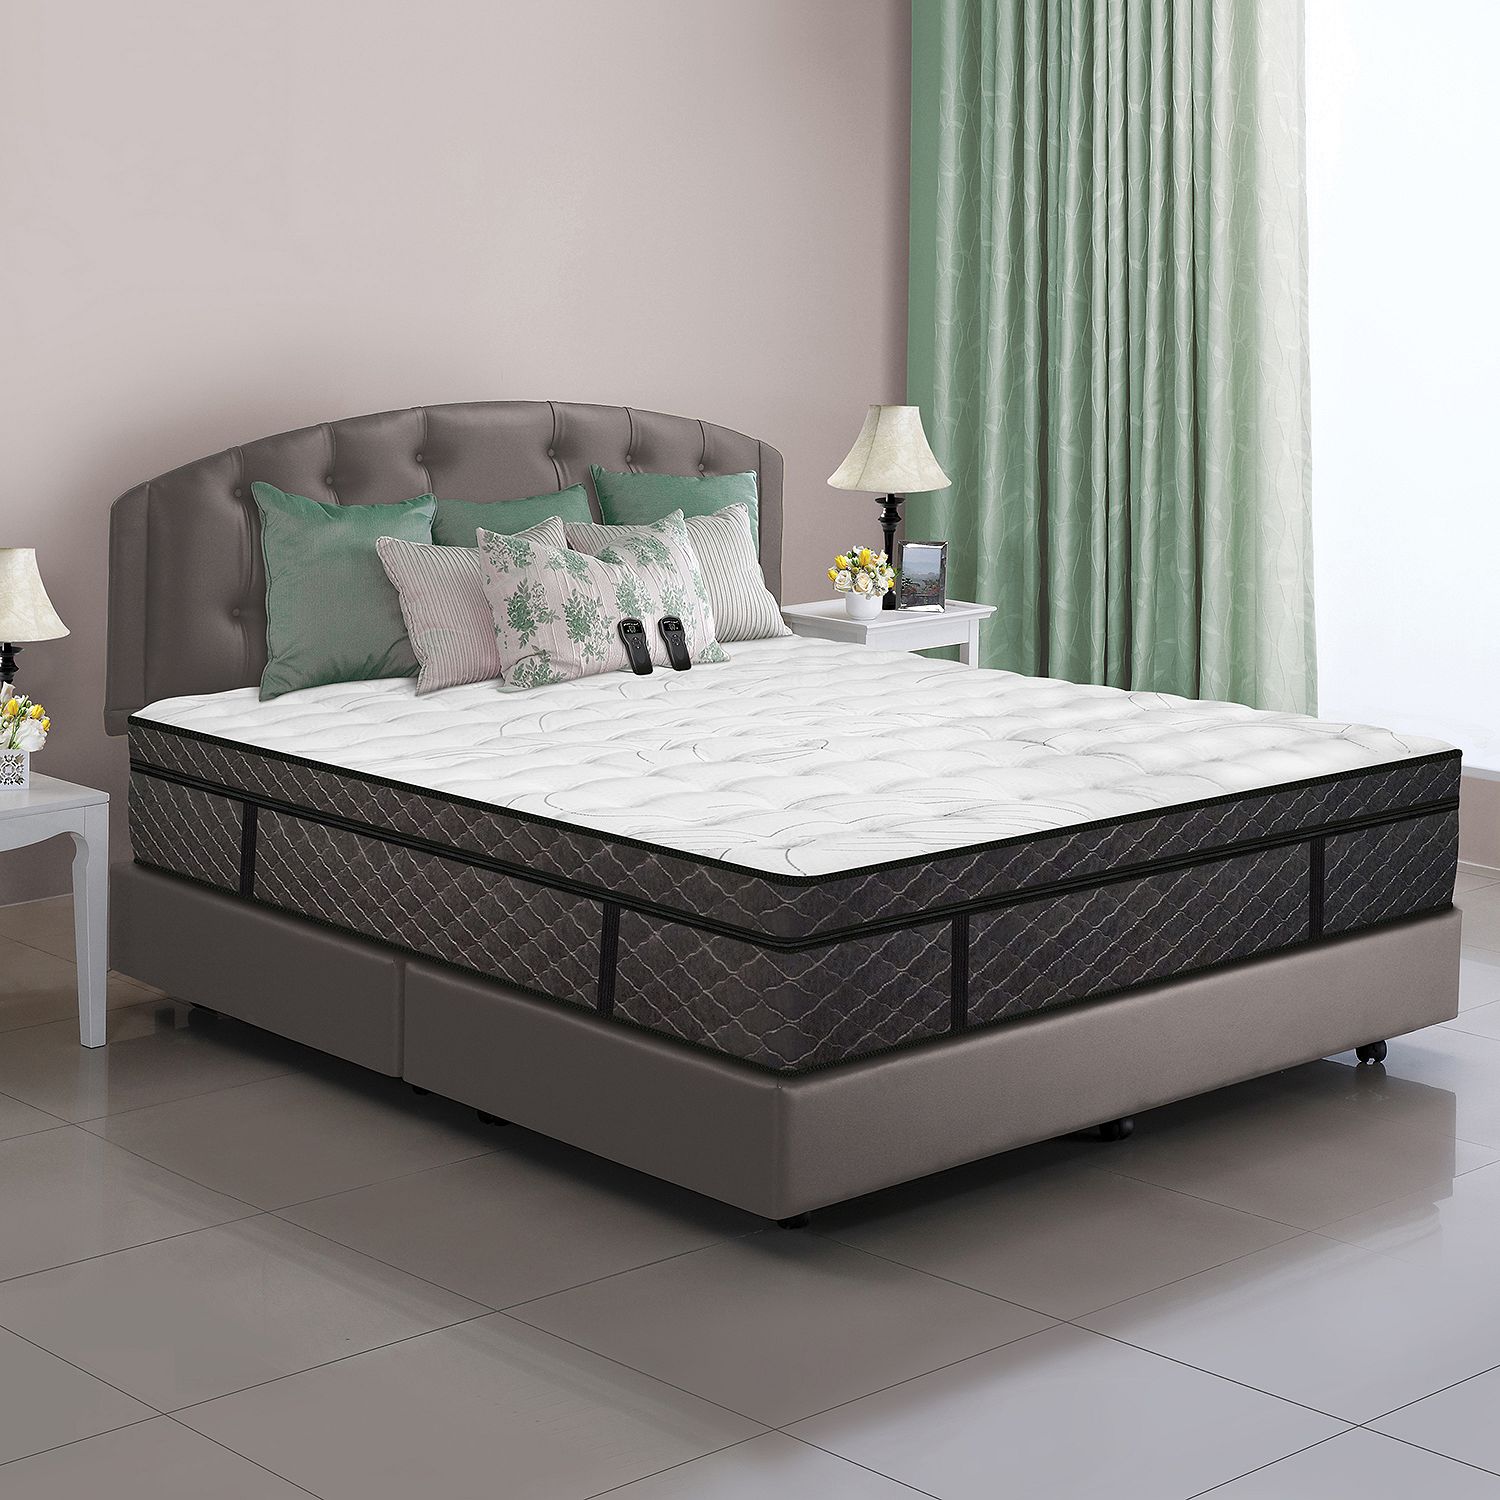 What Mattress Type is Best for You?